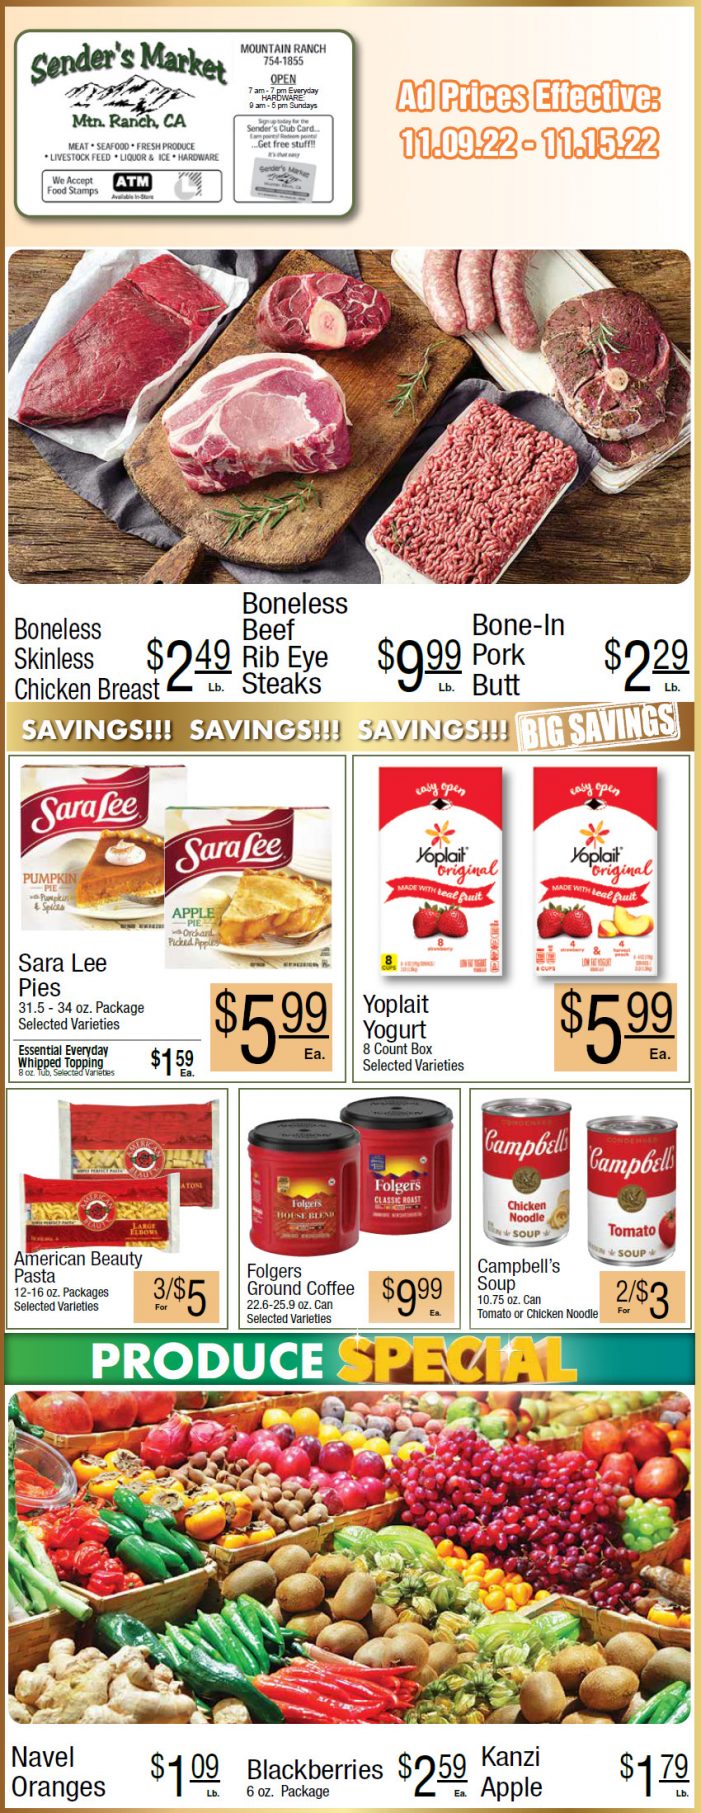 Sender’s Market Weekly Ad & Grocery Specials Through November 15! Shop Local & Save!